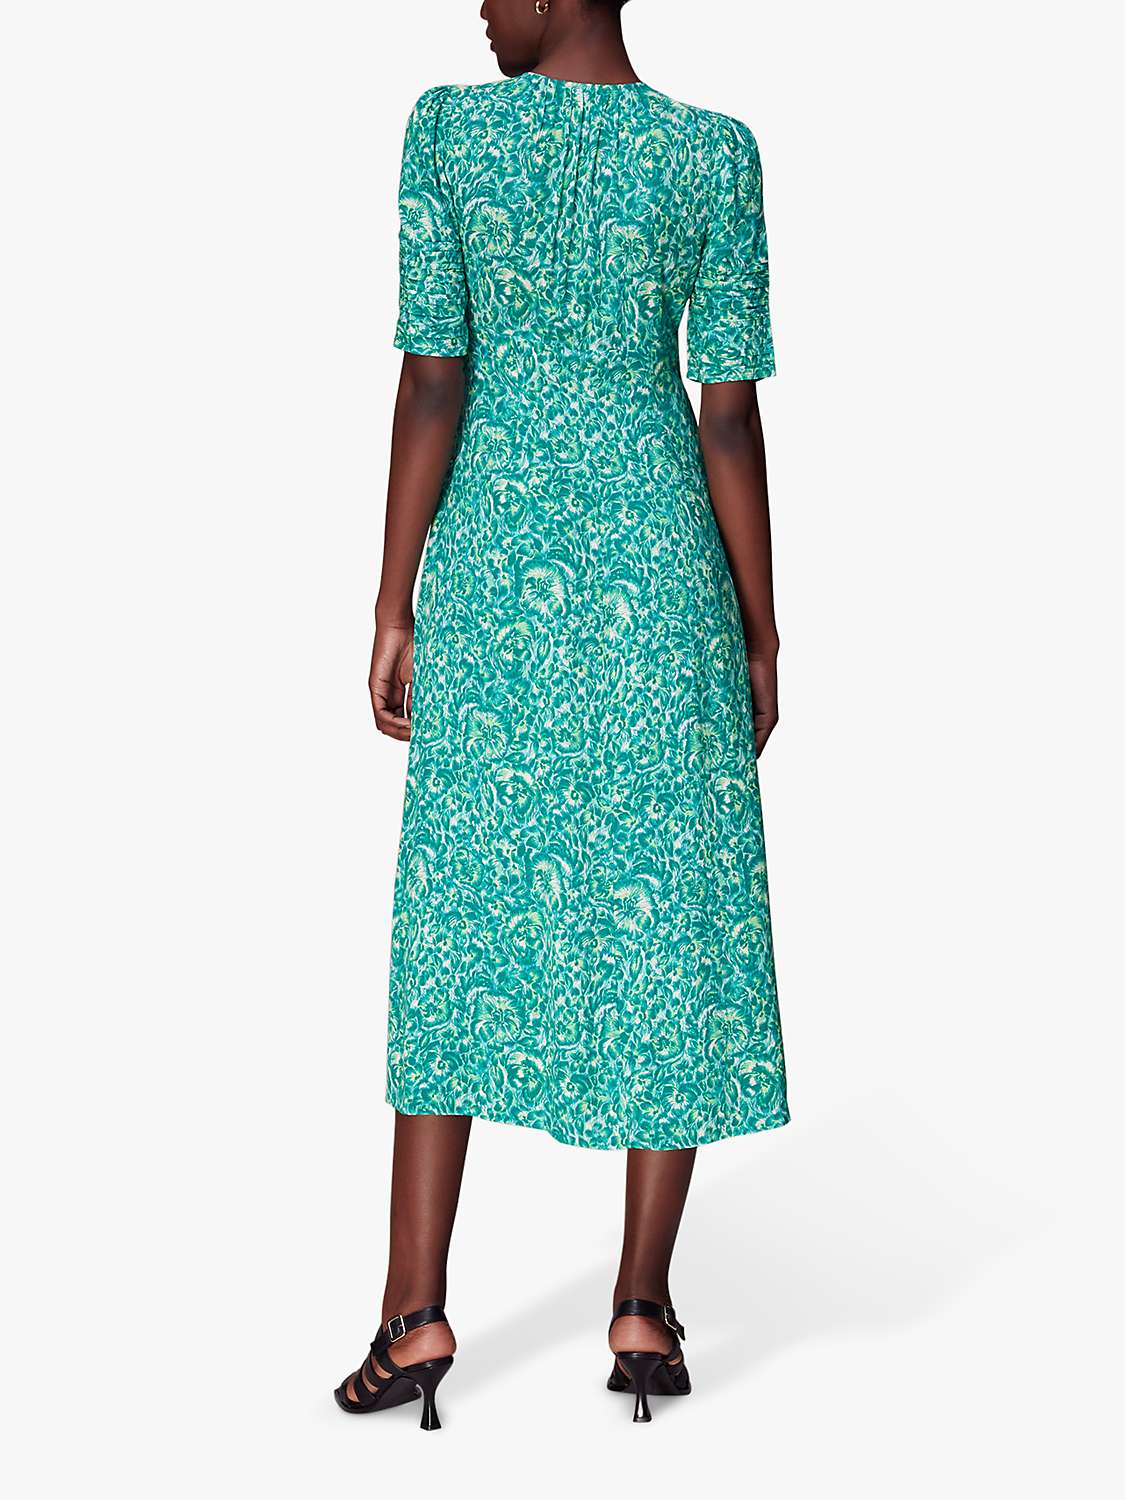 Buy Whistles Clouded Floral Tie Midi Dress, Green/Multi Online at johnlewis.com